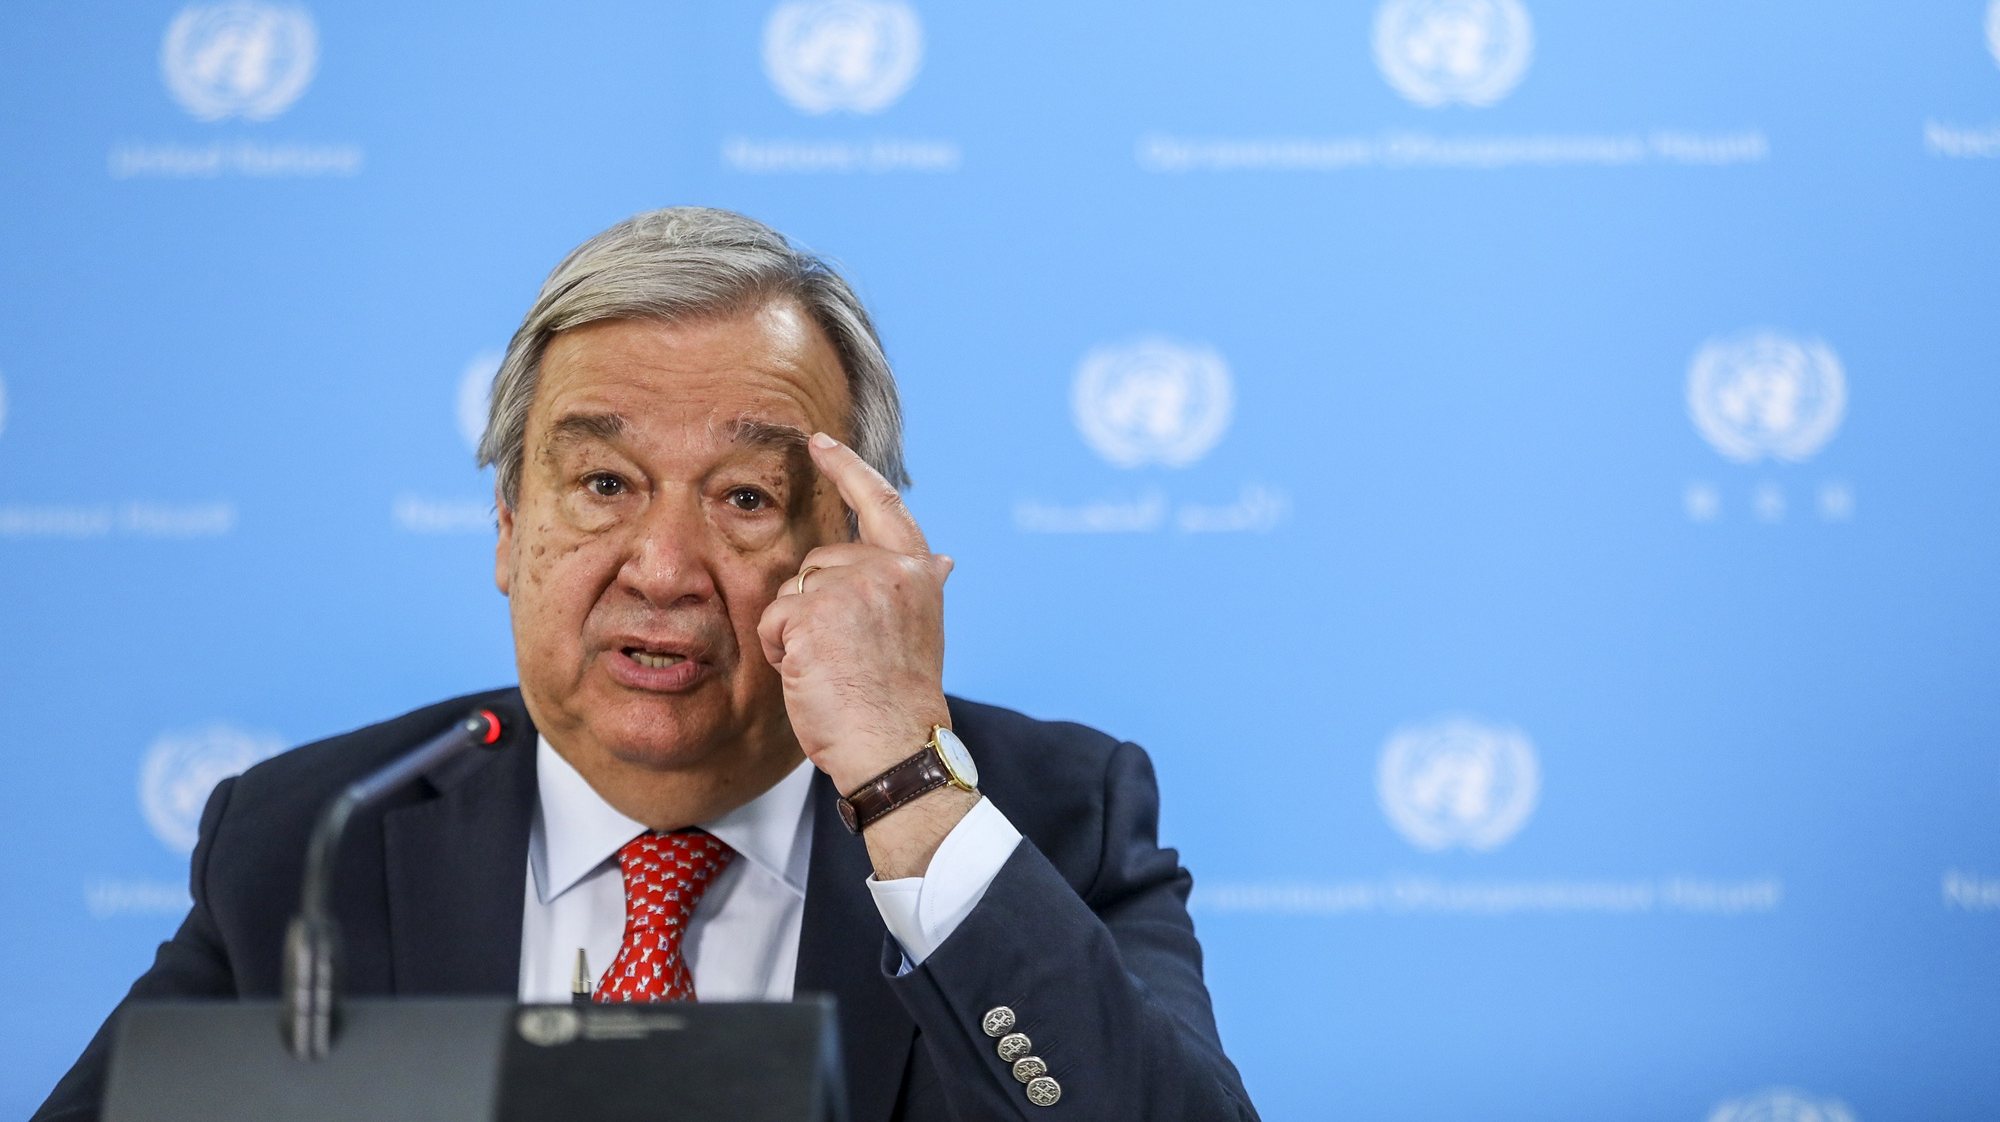 epa10606140 United Nations Secretary-General Antonio Guterres addresses journalists during a press conference in which he talked about the latest developments in the region, including the situation in Sudan, at the UN’s offices in Nairobi, Kenya, 03 May 2023. Guterres said, &#039;Khartoum is in turmoil, Darfur is burning once again, and the UN Refugee Agency is warning that more than 800,000 people could flee the country in the coming days and weeks.&#039;  EPA/Daniel Irungu